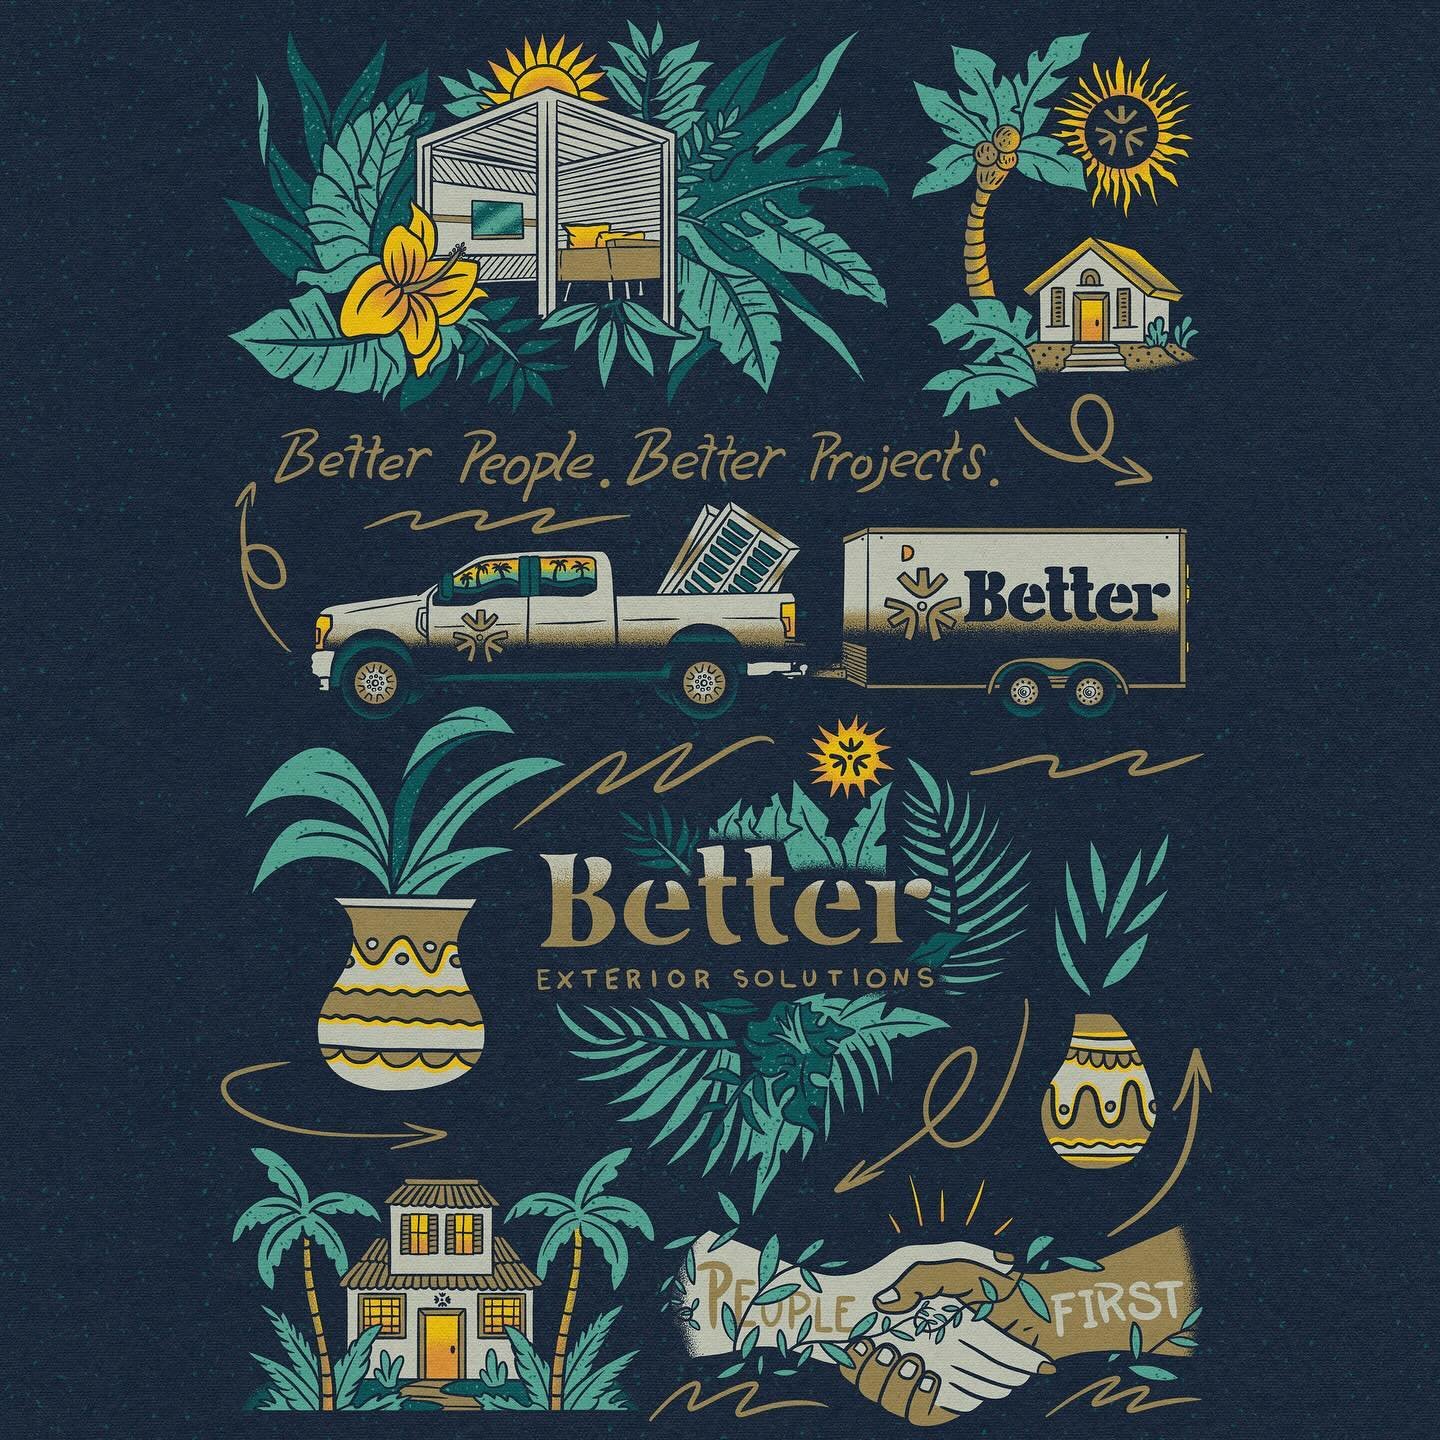 @betterexteriorsolutions brand flash sheet 7 of 10. 🏡🪟🌴
If outdoor hangouts and hurricane protection matter to you, follow Better Exteriors as your go to for outdoor style and protection against the elements here in Florida . #betterexteriors #bra